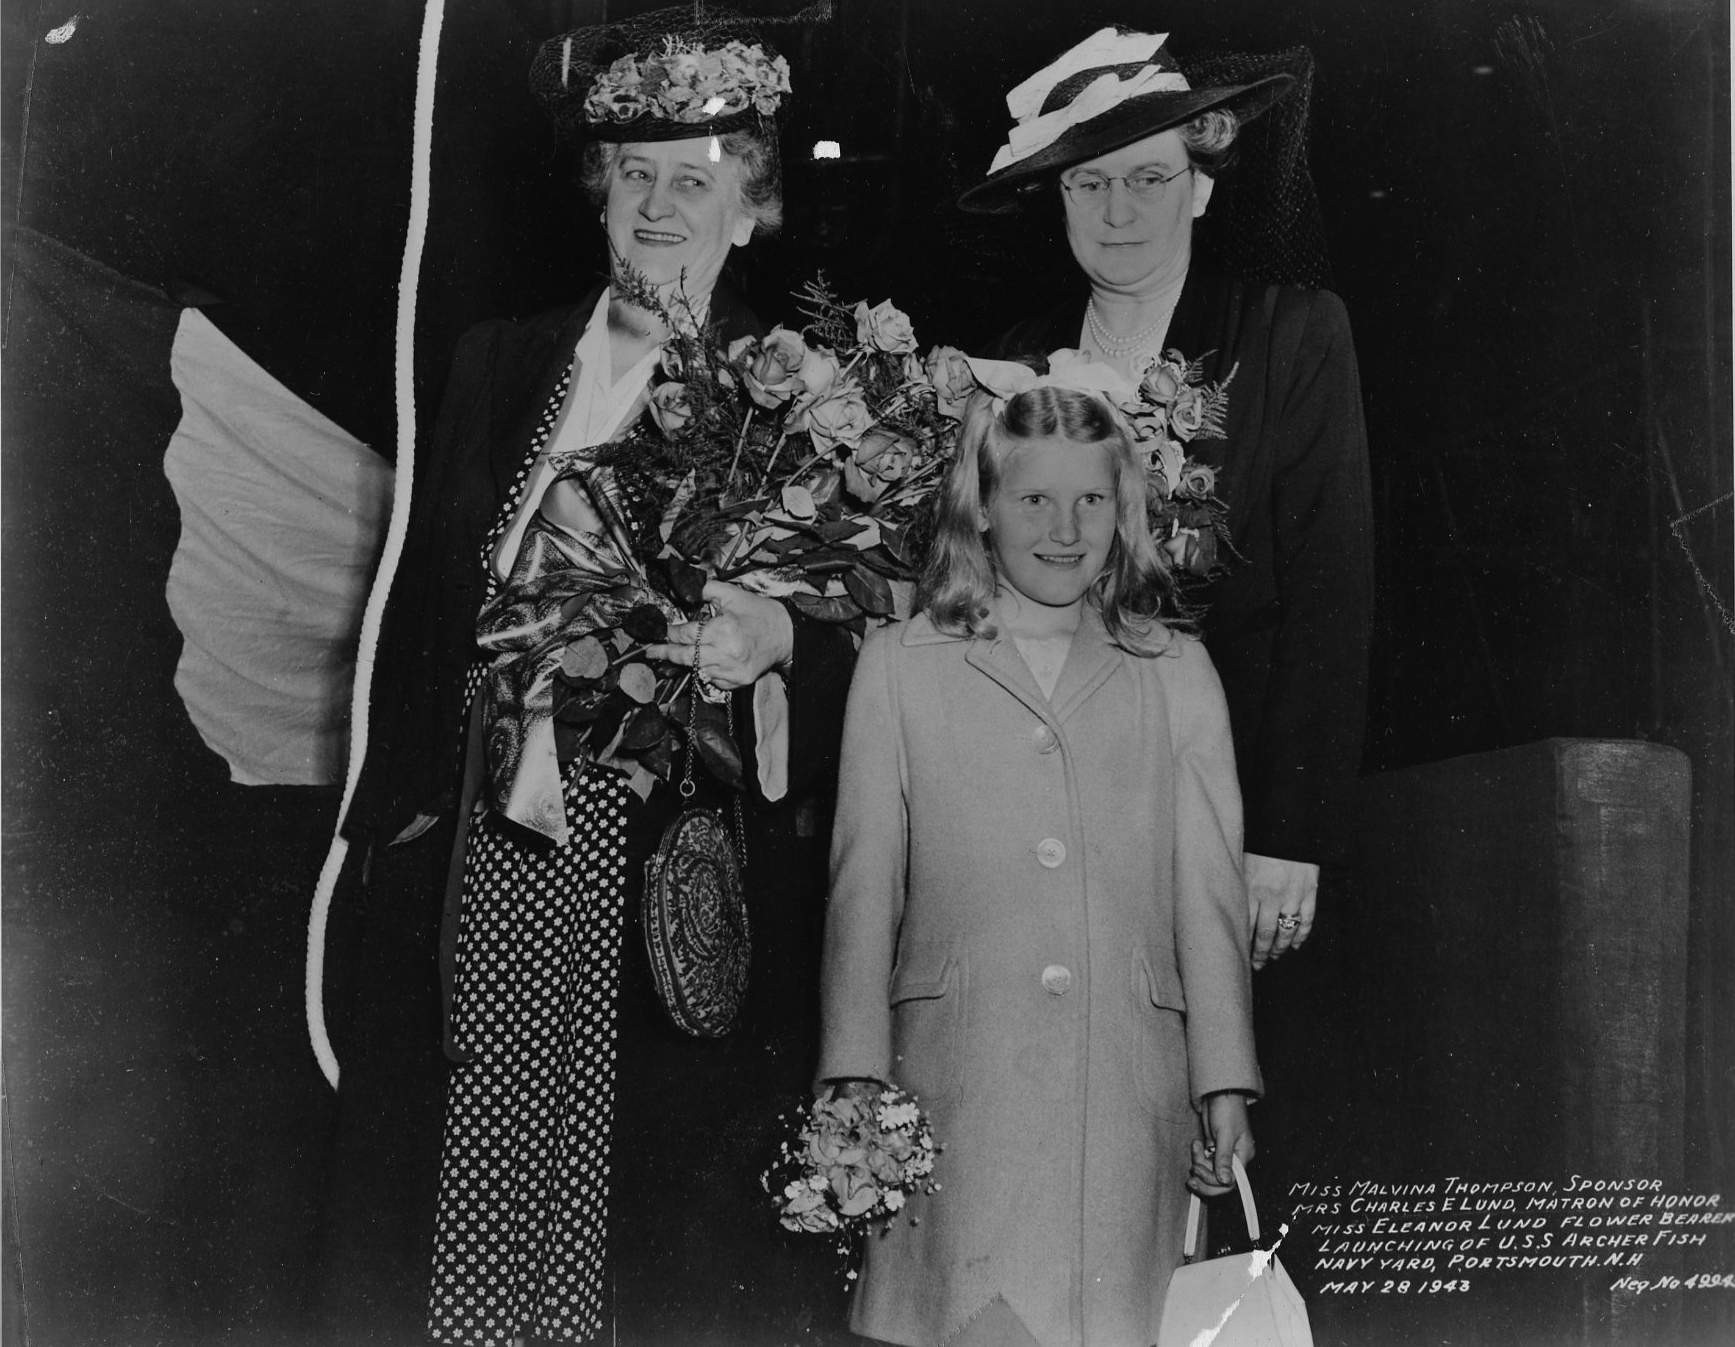 Malvina Thompson (sponsor), Mrs. Charles E. Lund (matron of honor), and Eleanor Lund (flower bearer) at the launching ceremony of Archerfish, Portsmouth Navy Yard, Kittery, Maine, United States, 28 May 1943.